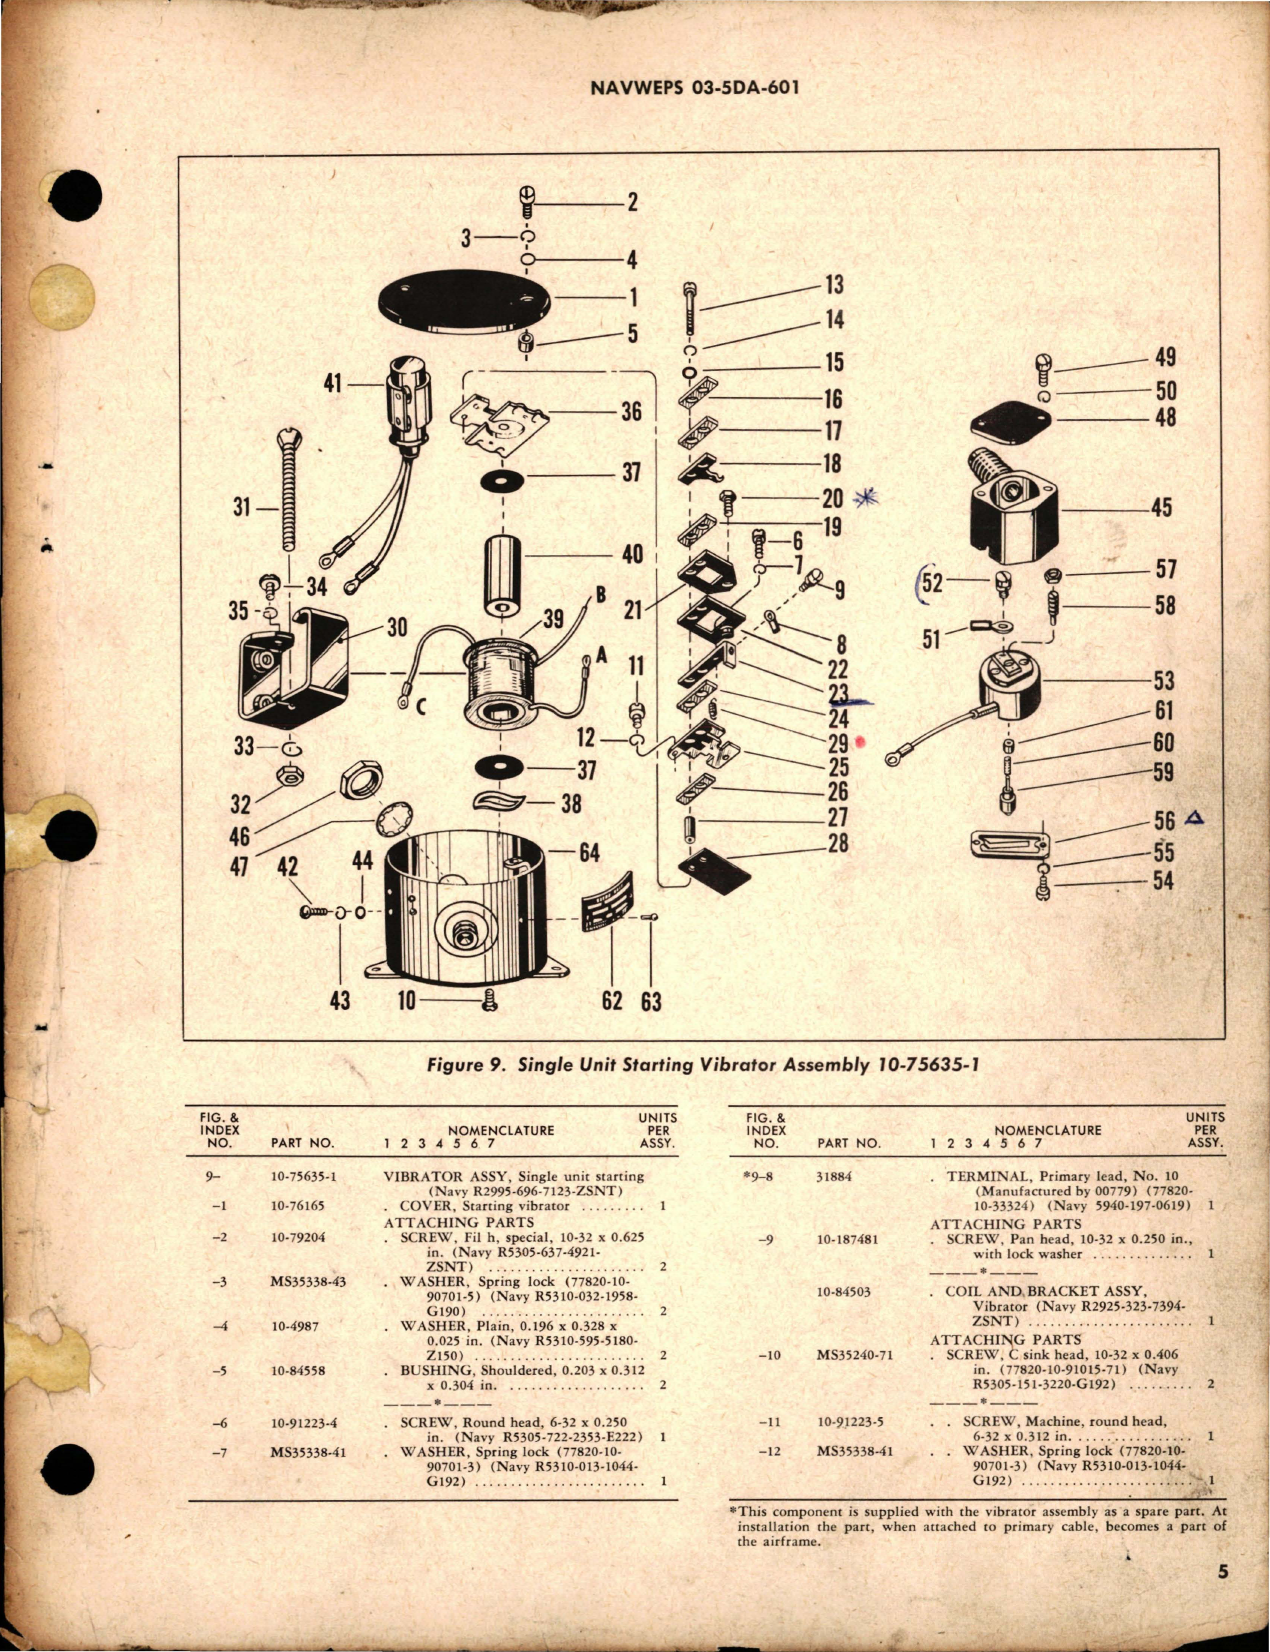 Sample page 5 from AirCorps Library document: Overhaul Instructions with Parts Breakdown for Single Unit Starting Vibrator - 1075635-1